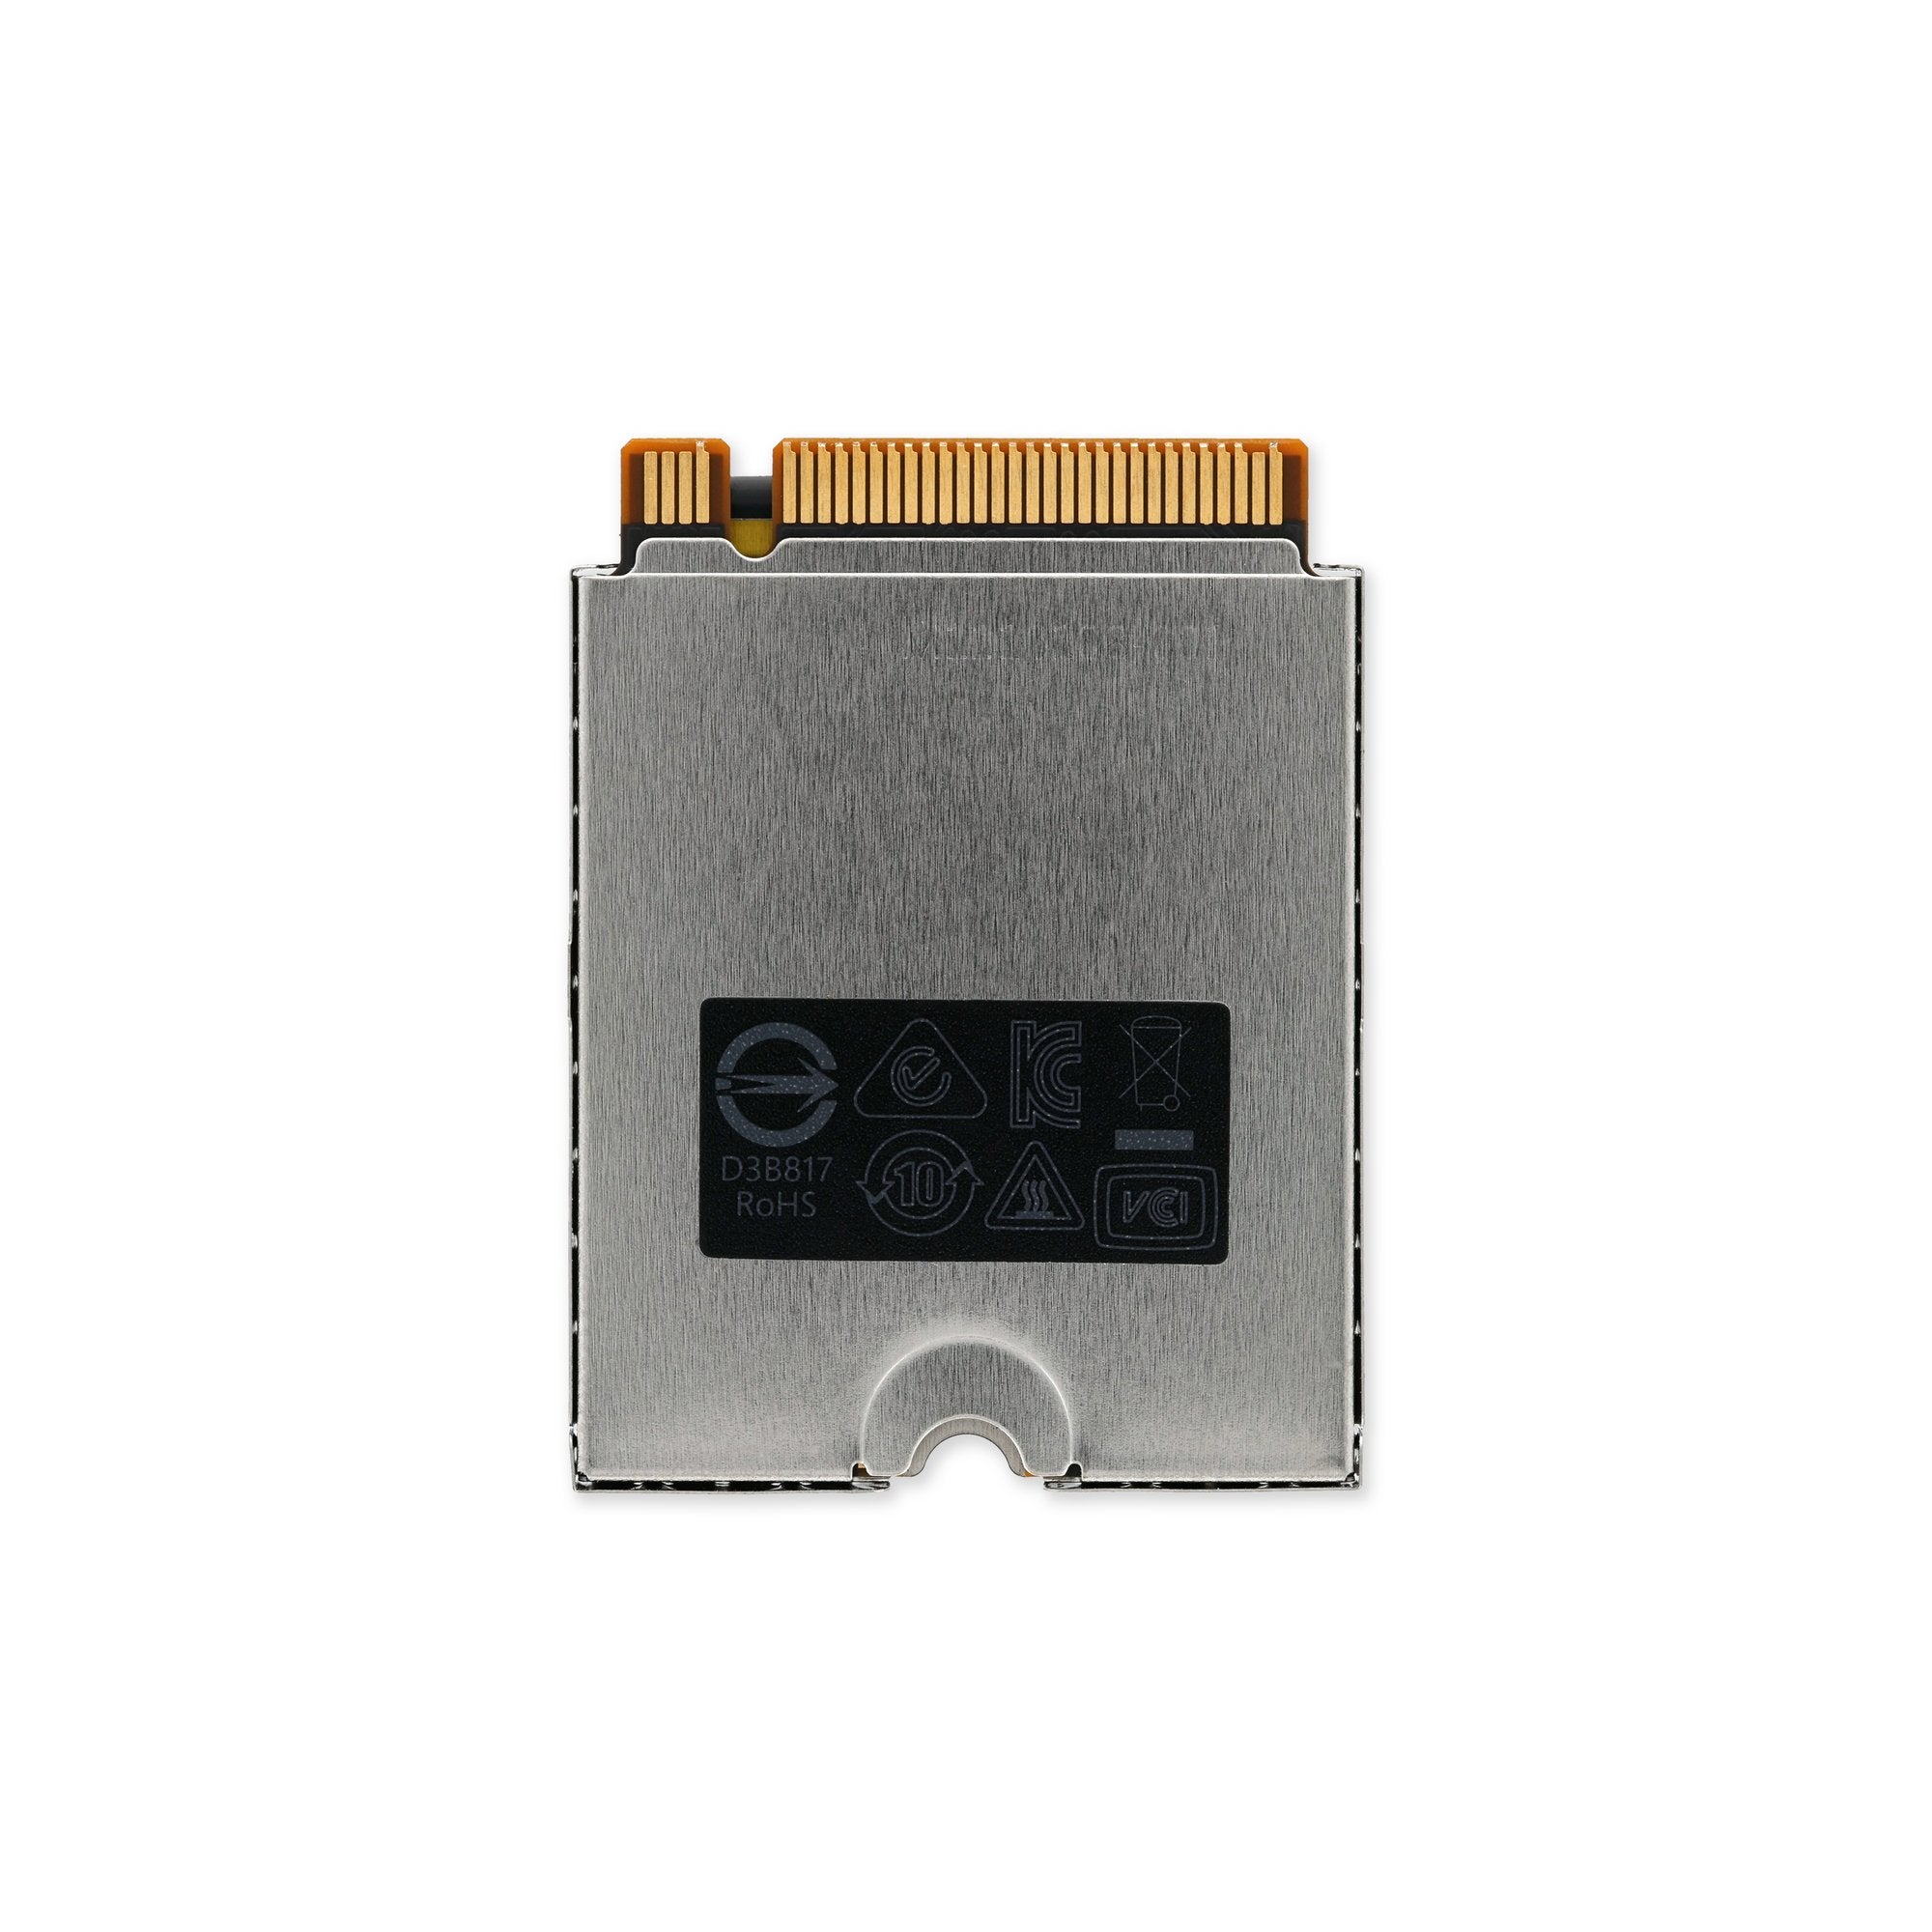 Surface Laptop Studio SSD - Genuine 256 GB New Part Only